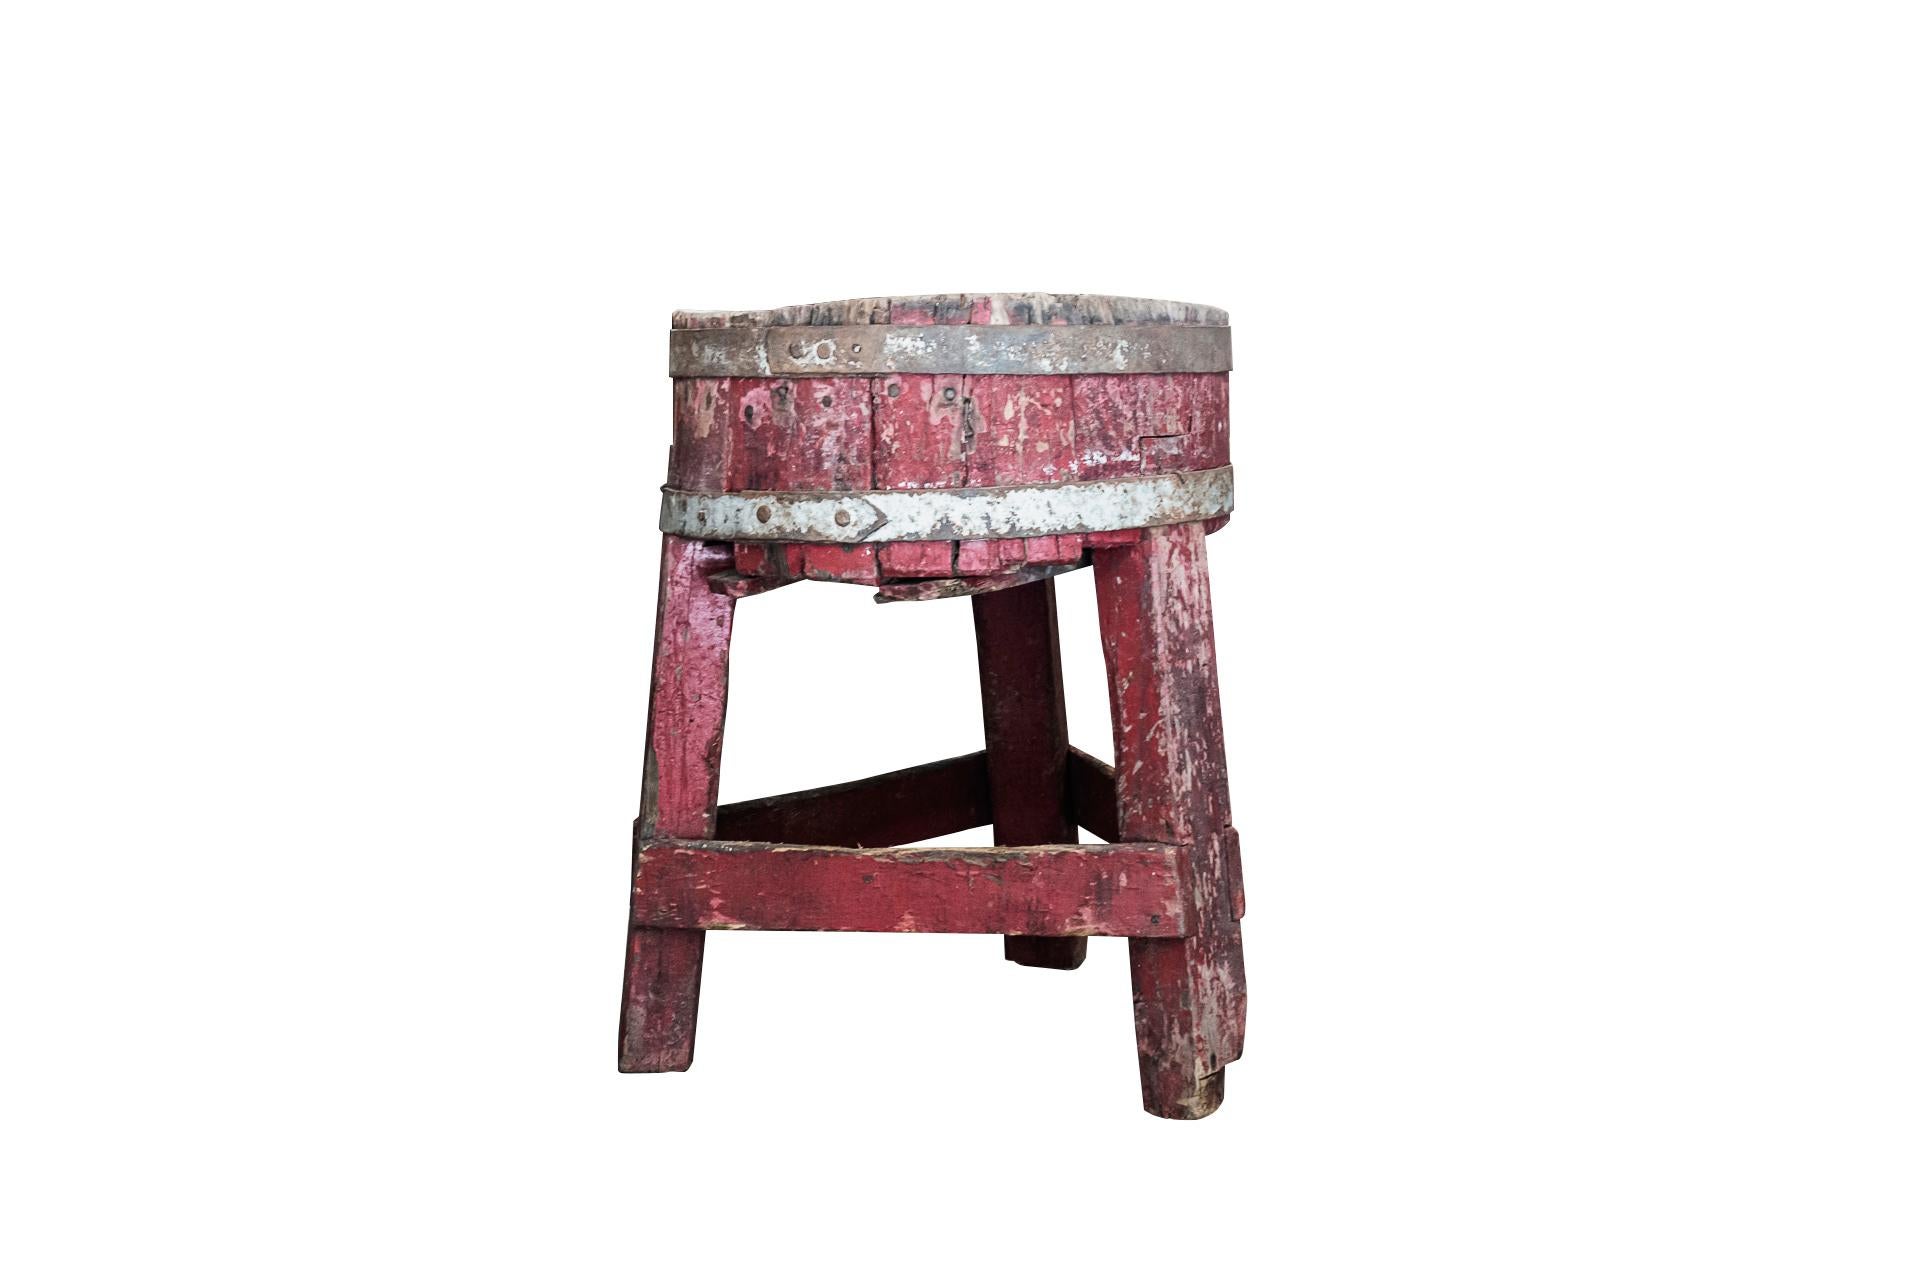 Brutalist style, Tripod butcher's chopping block, 
Natural wood and red stained wood with iron rim, 
circa 1900, France.

Measures: Diameter 60 cm, height 80 cm.